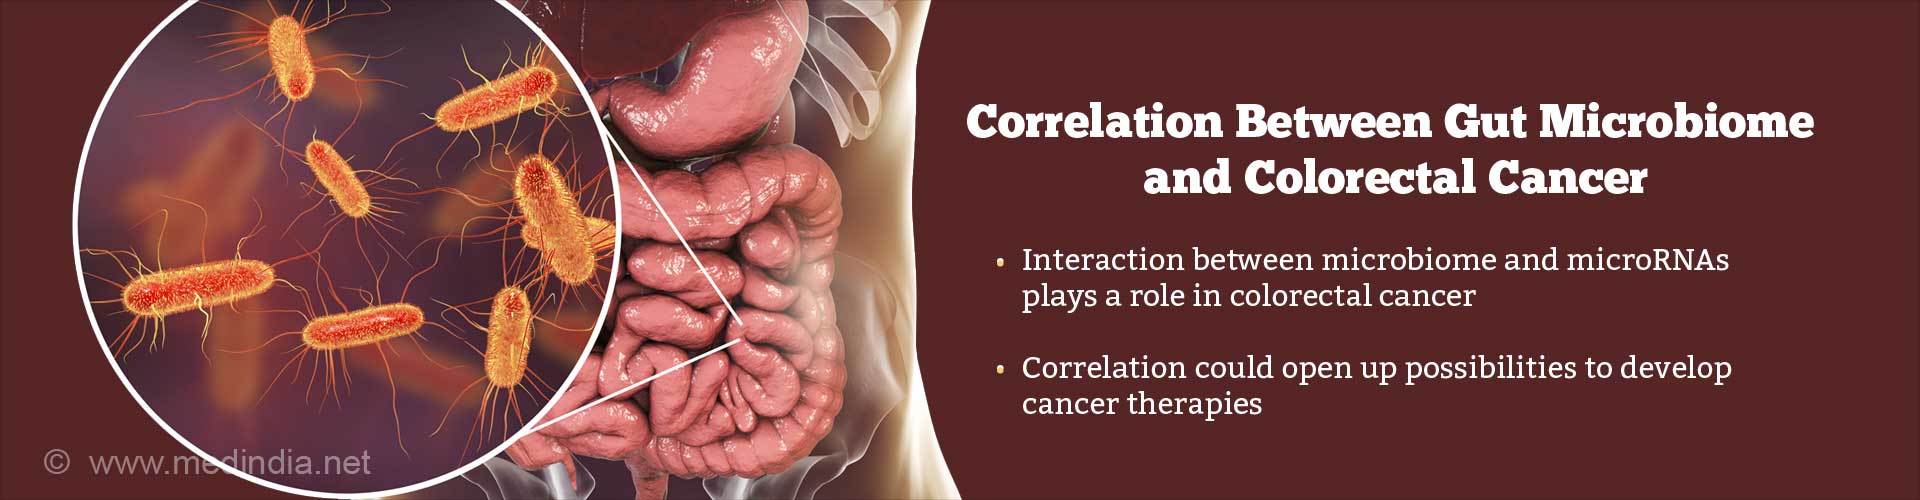 correlation between gut microbiome and colorectal cancer
- interaction between microbiome and microRNAs play a role in colorectal cancer
- correlation could open up possibilities to develop cancer therapies